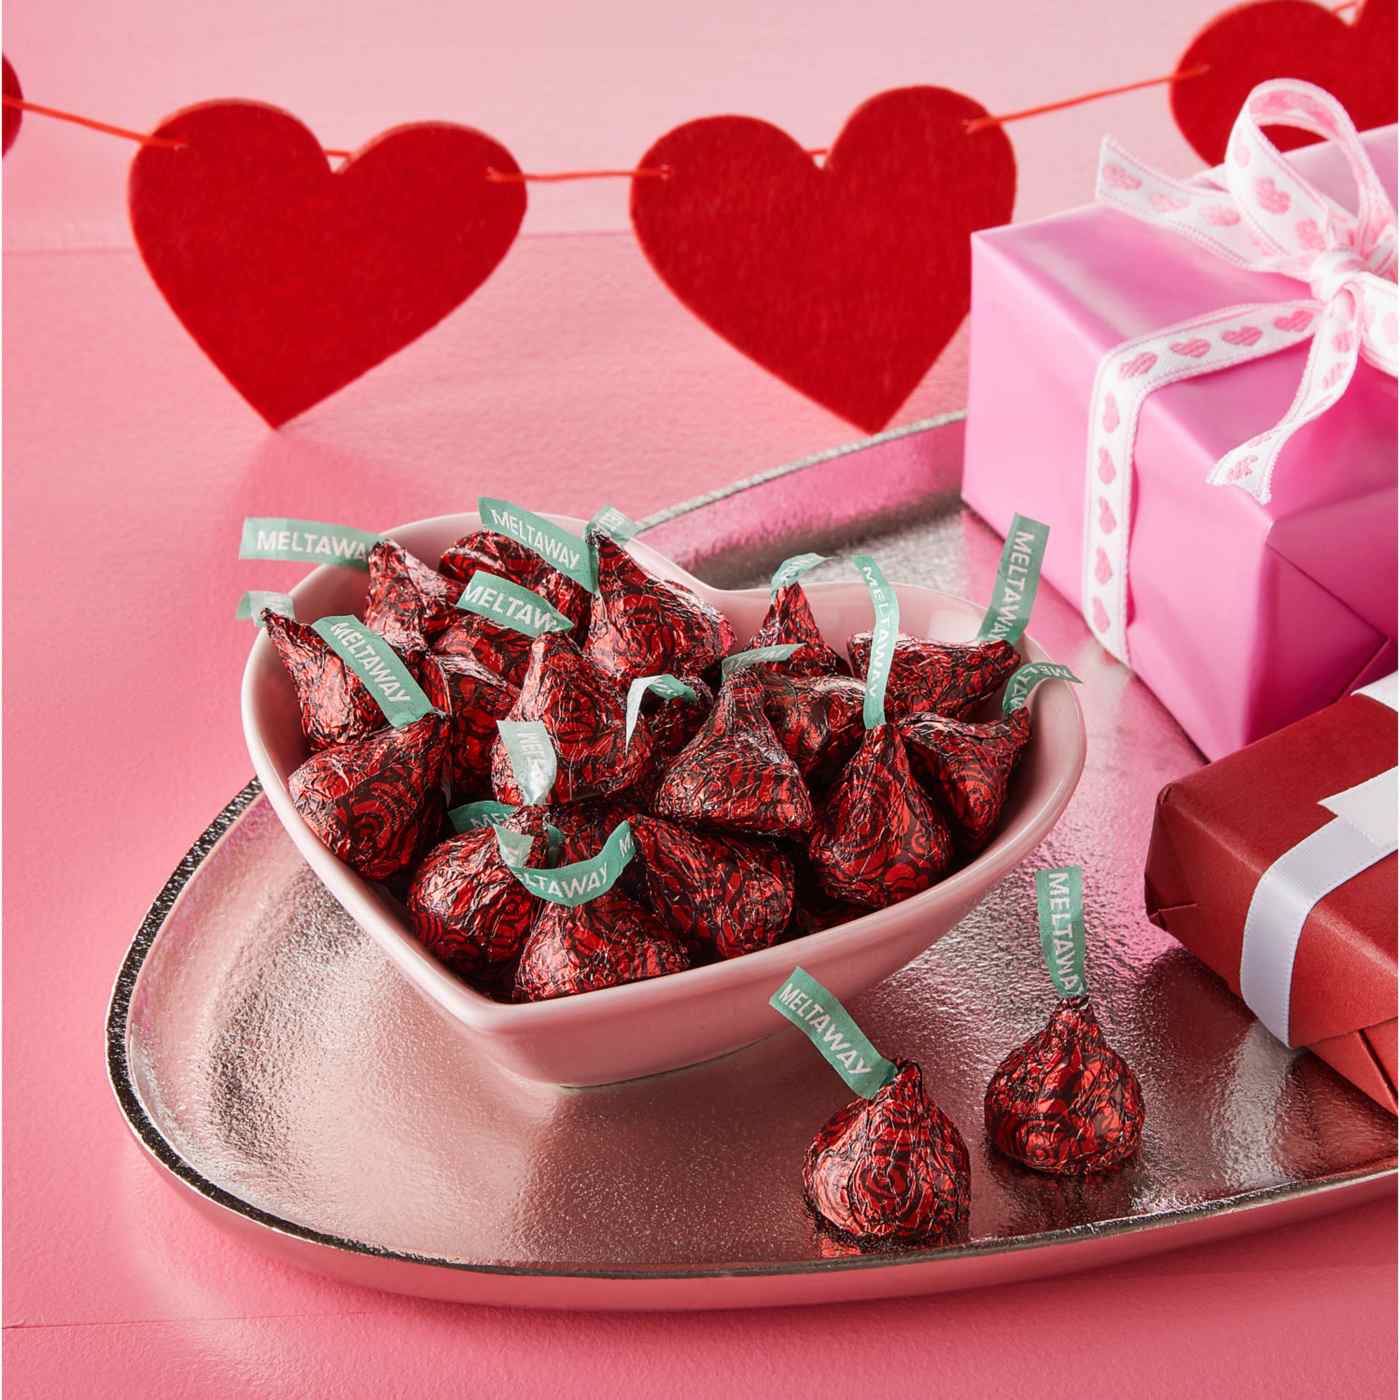 Hershey's Kisses Roses Milk Chocolate Meltaway Valentine's Candy; image 3 of 7